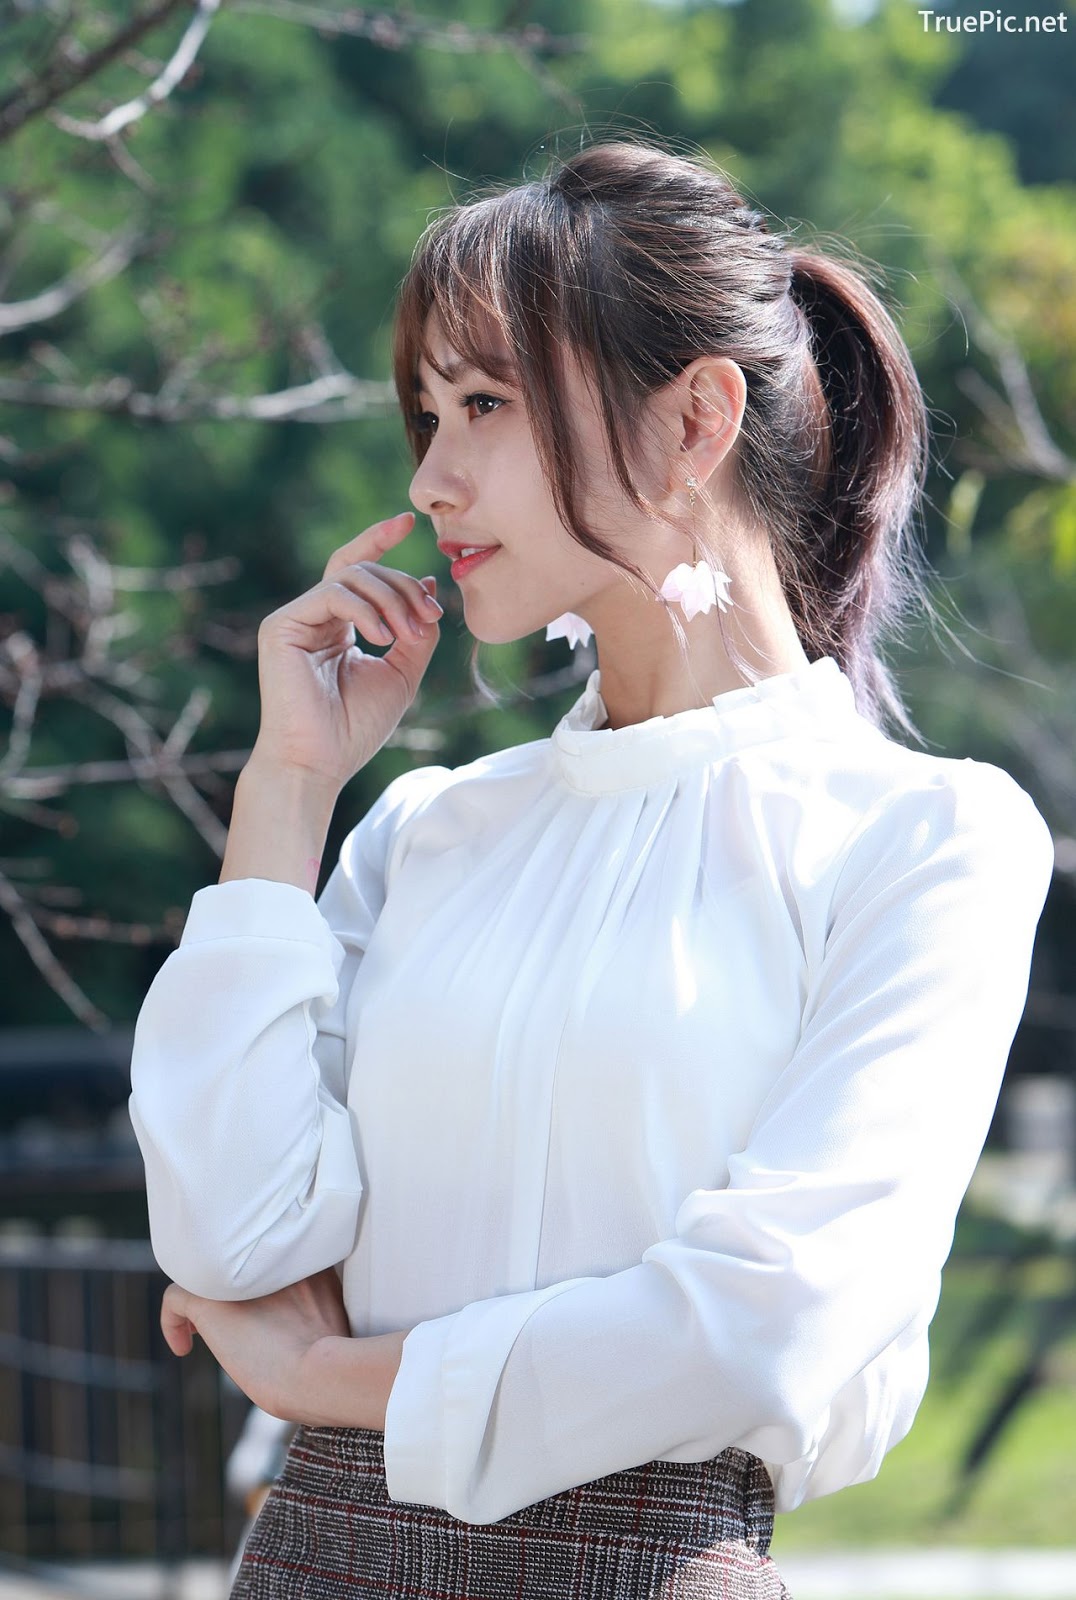 Image-Taiwanese-Model-郭思敏-Pure-And-Gorgeous-Girl-In-Office-Uniform-TruePic.net- Picture-31